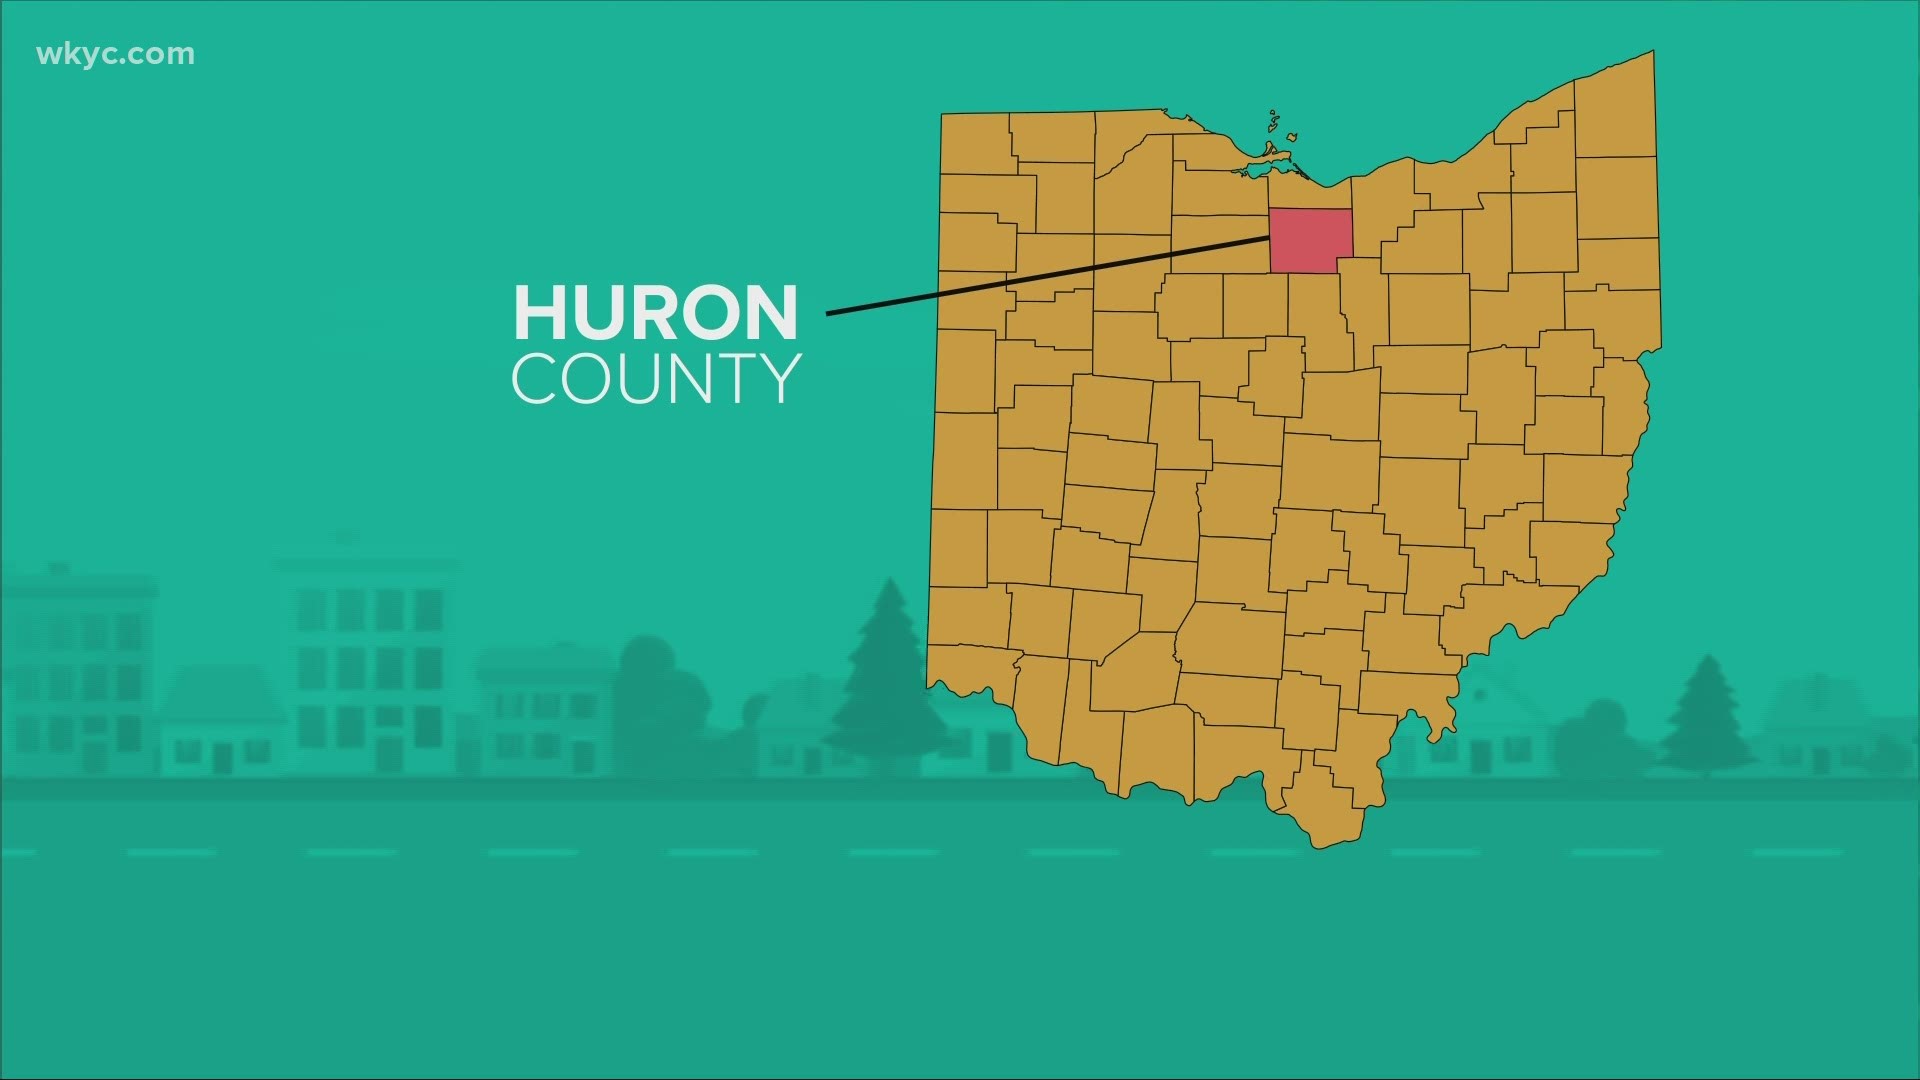 Our series 88 counties in 88 Days continues with a visit to Huron County.  A local community and school district have joined forces to rise above the pandemic.